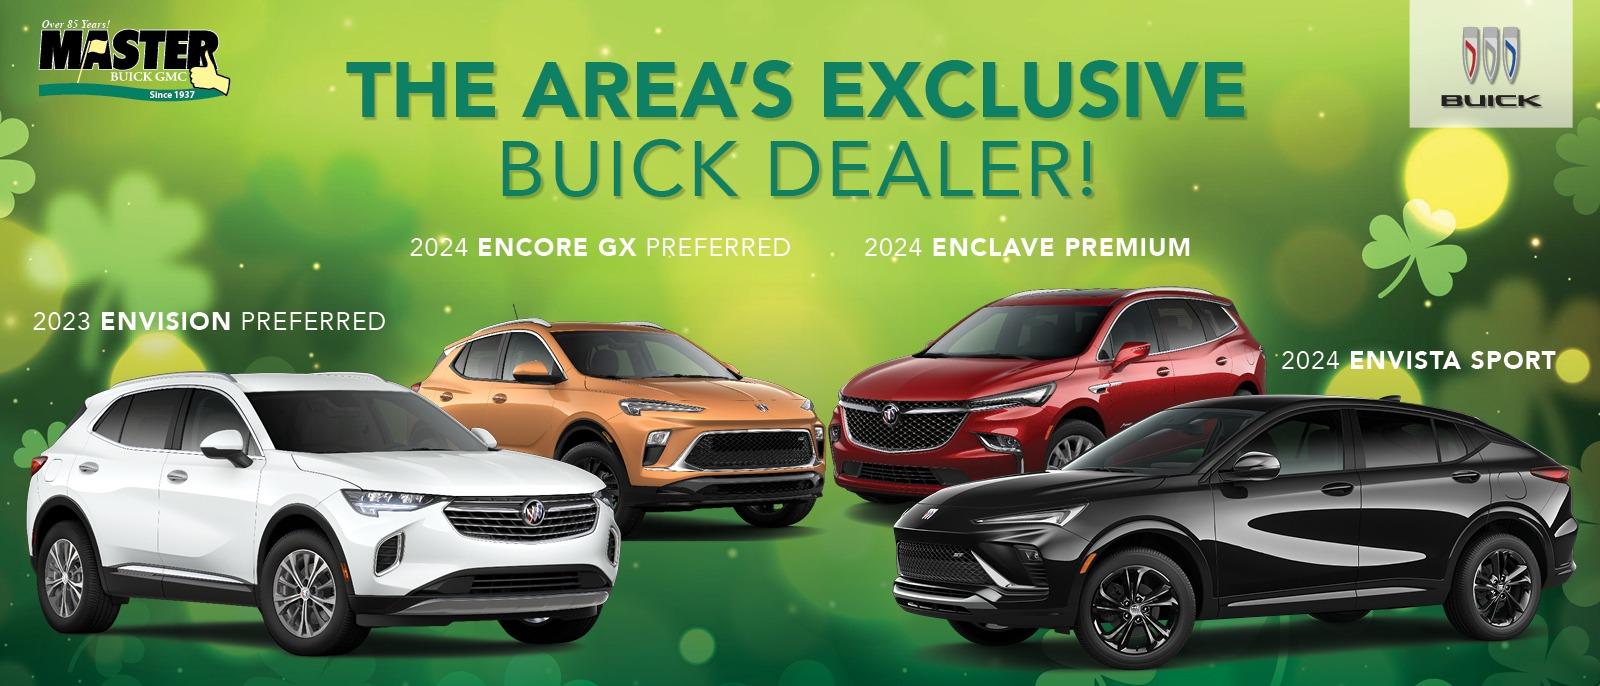 THE AREA’S EXCLUSIVE BUICK DEALER!